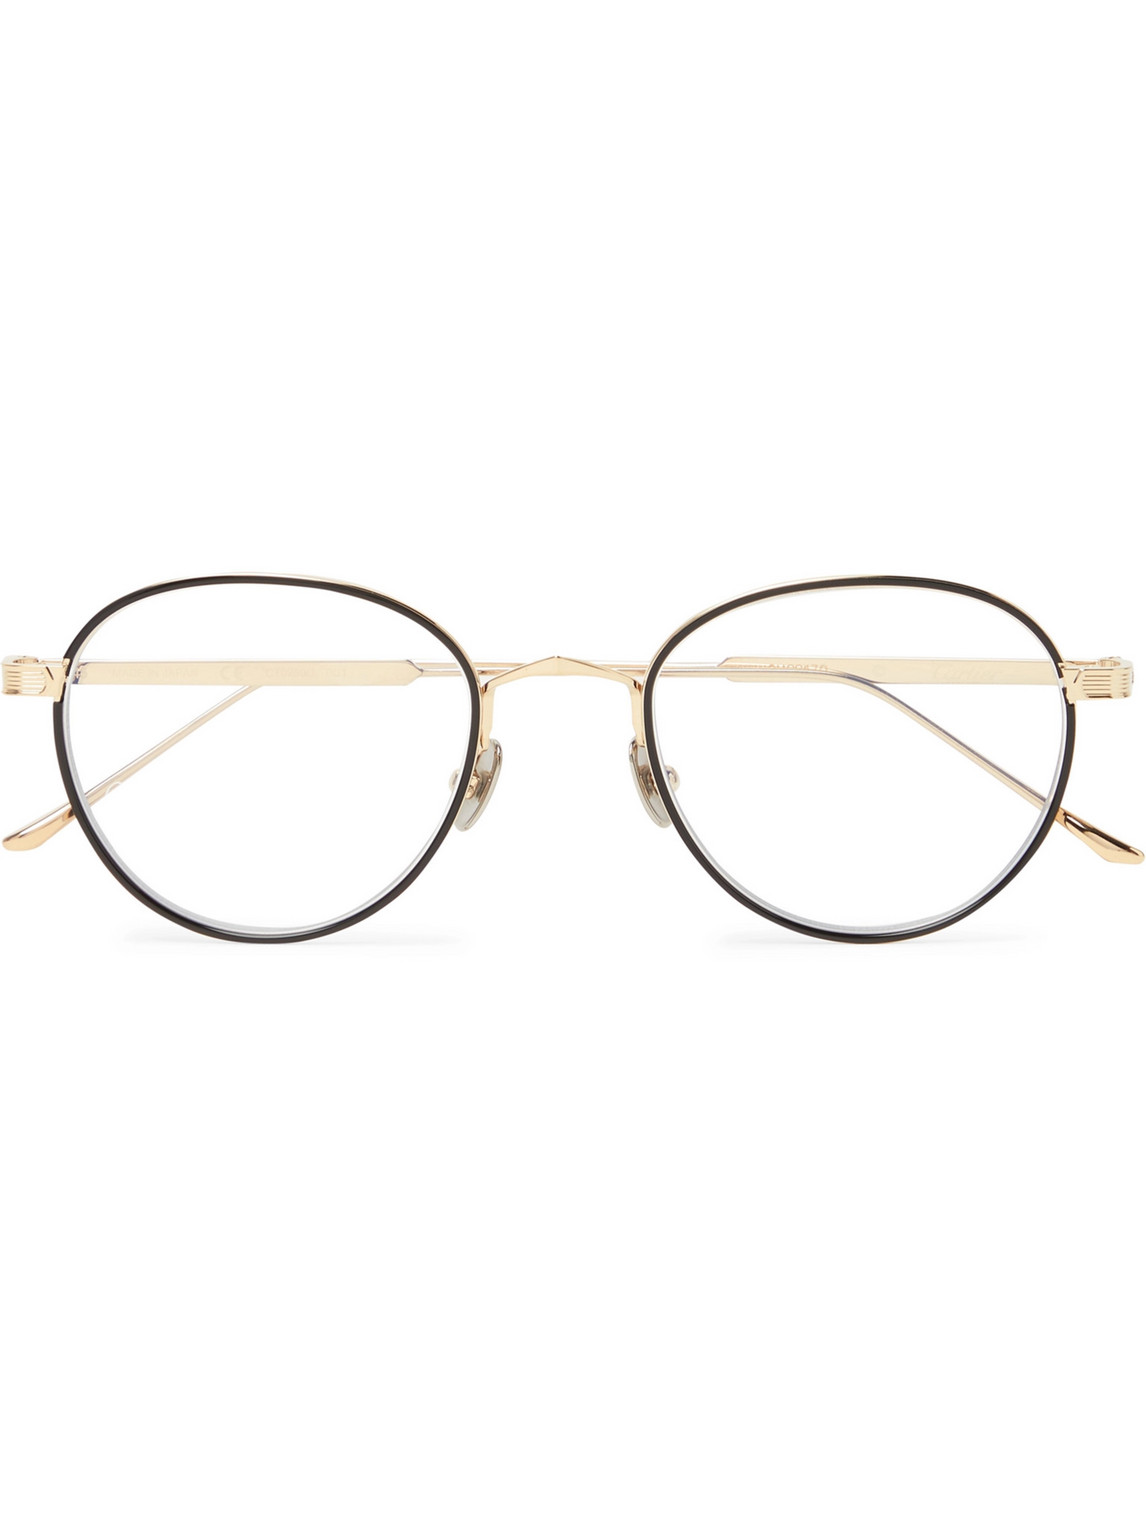 CARTIER ROUND-FRAME GOLD-TONE AND ACETATE OPTICAL GLASSES